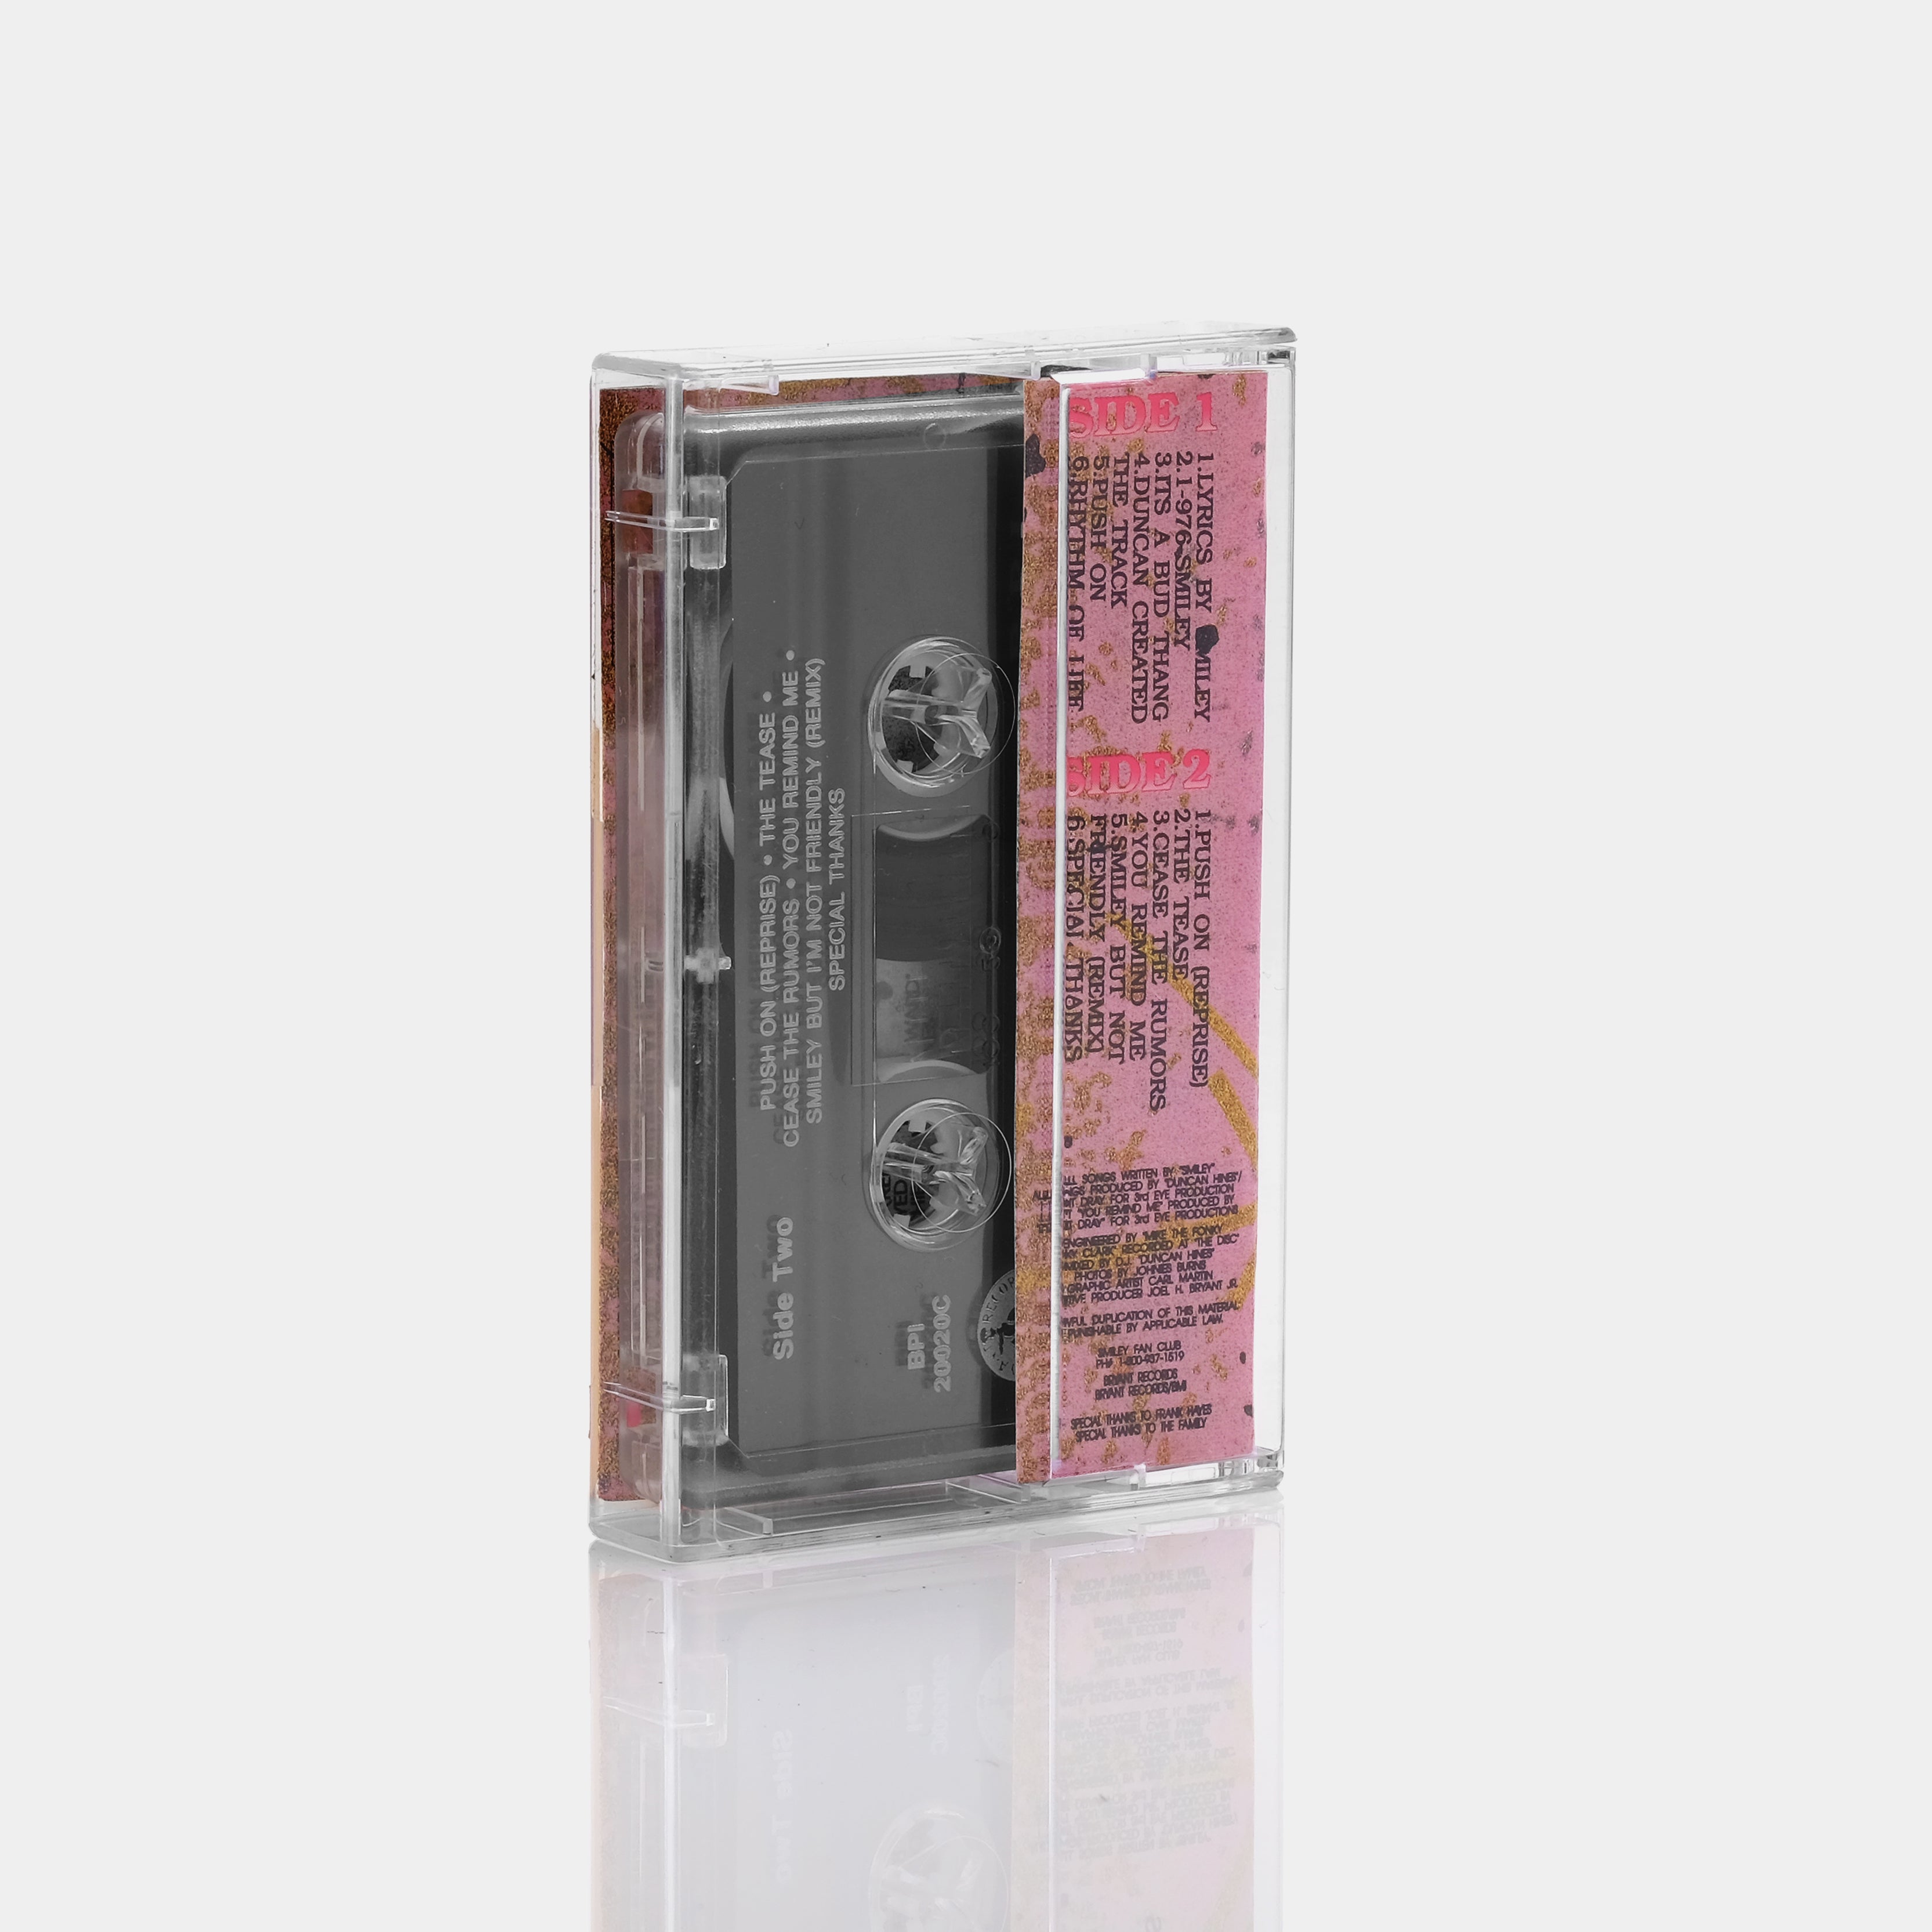 Smiley - The Rhythm of Life Cassette Tape